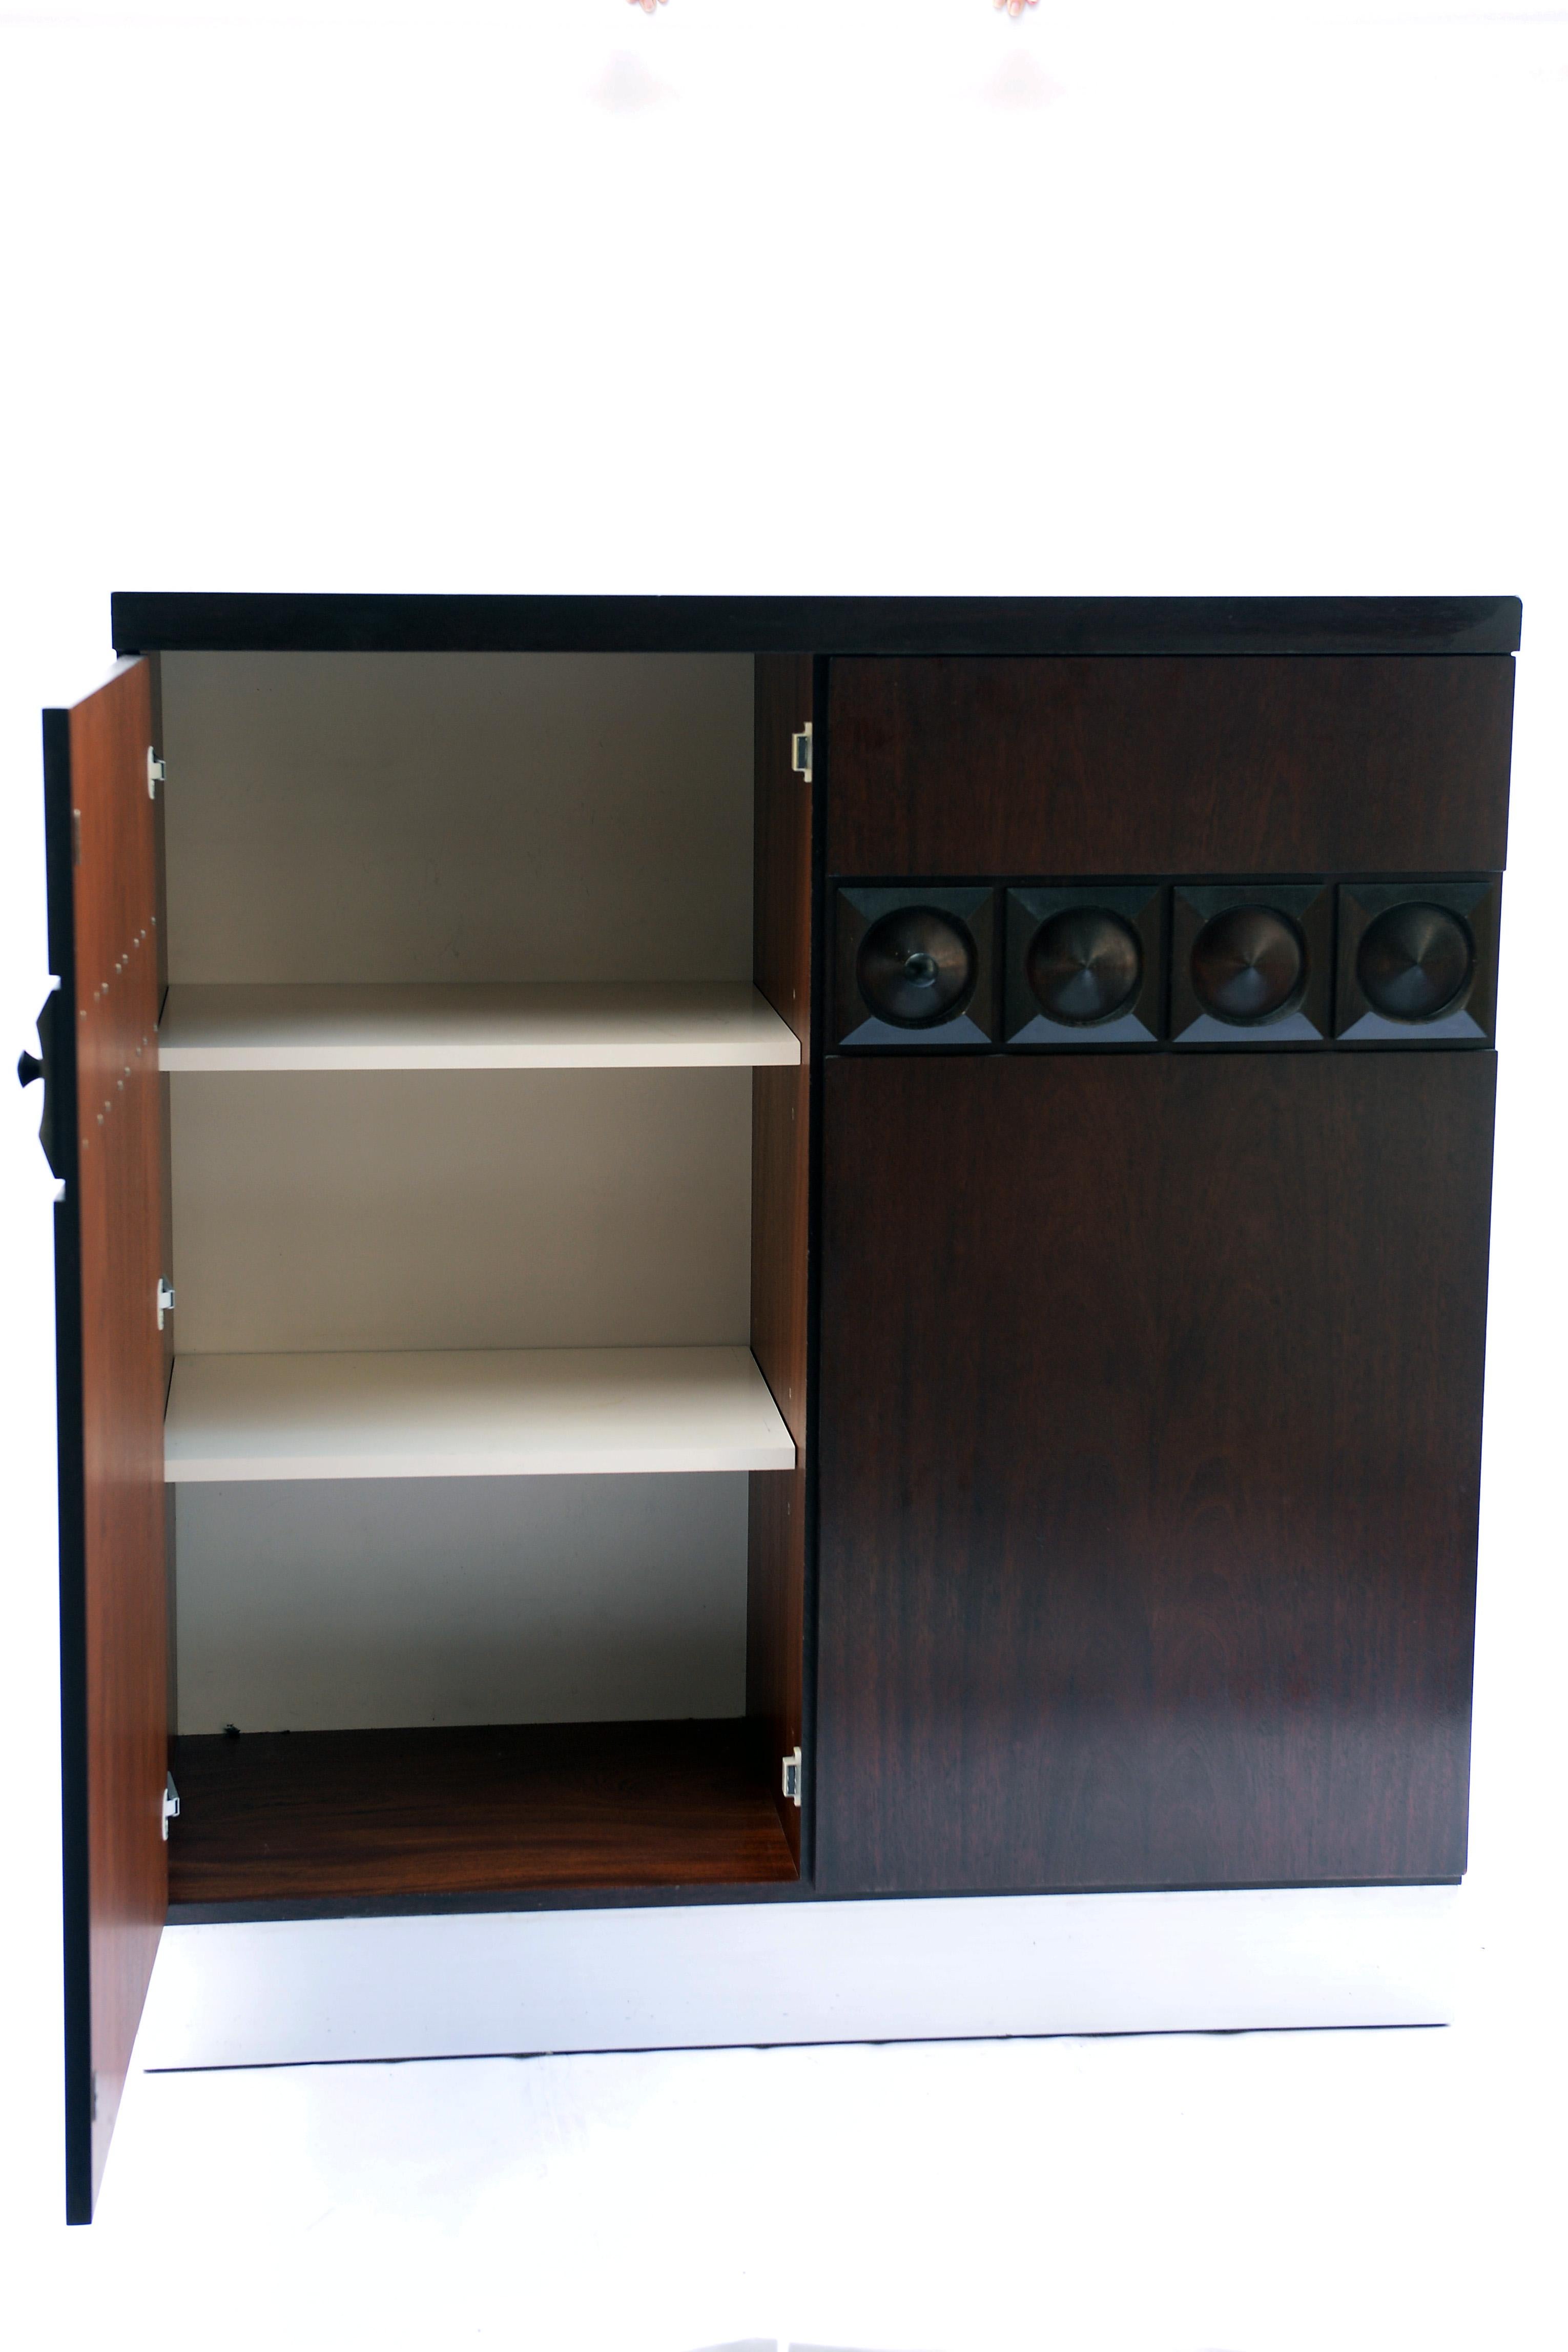 This two-door cabinet is made from oak and unlike many other Brutalist cabinets this one has only a partly graphical design, making it more subtile.

It has two shelves on the left and the right door unveils a lit 3 shelves and a 3-bottle